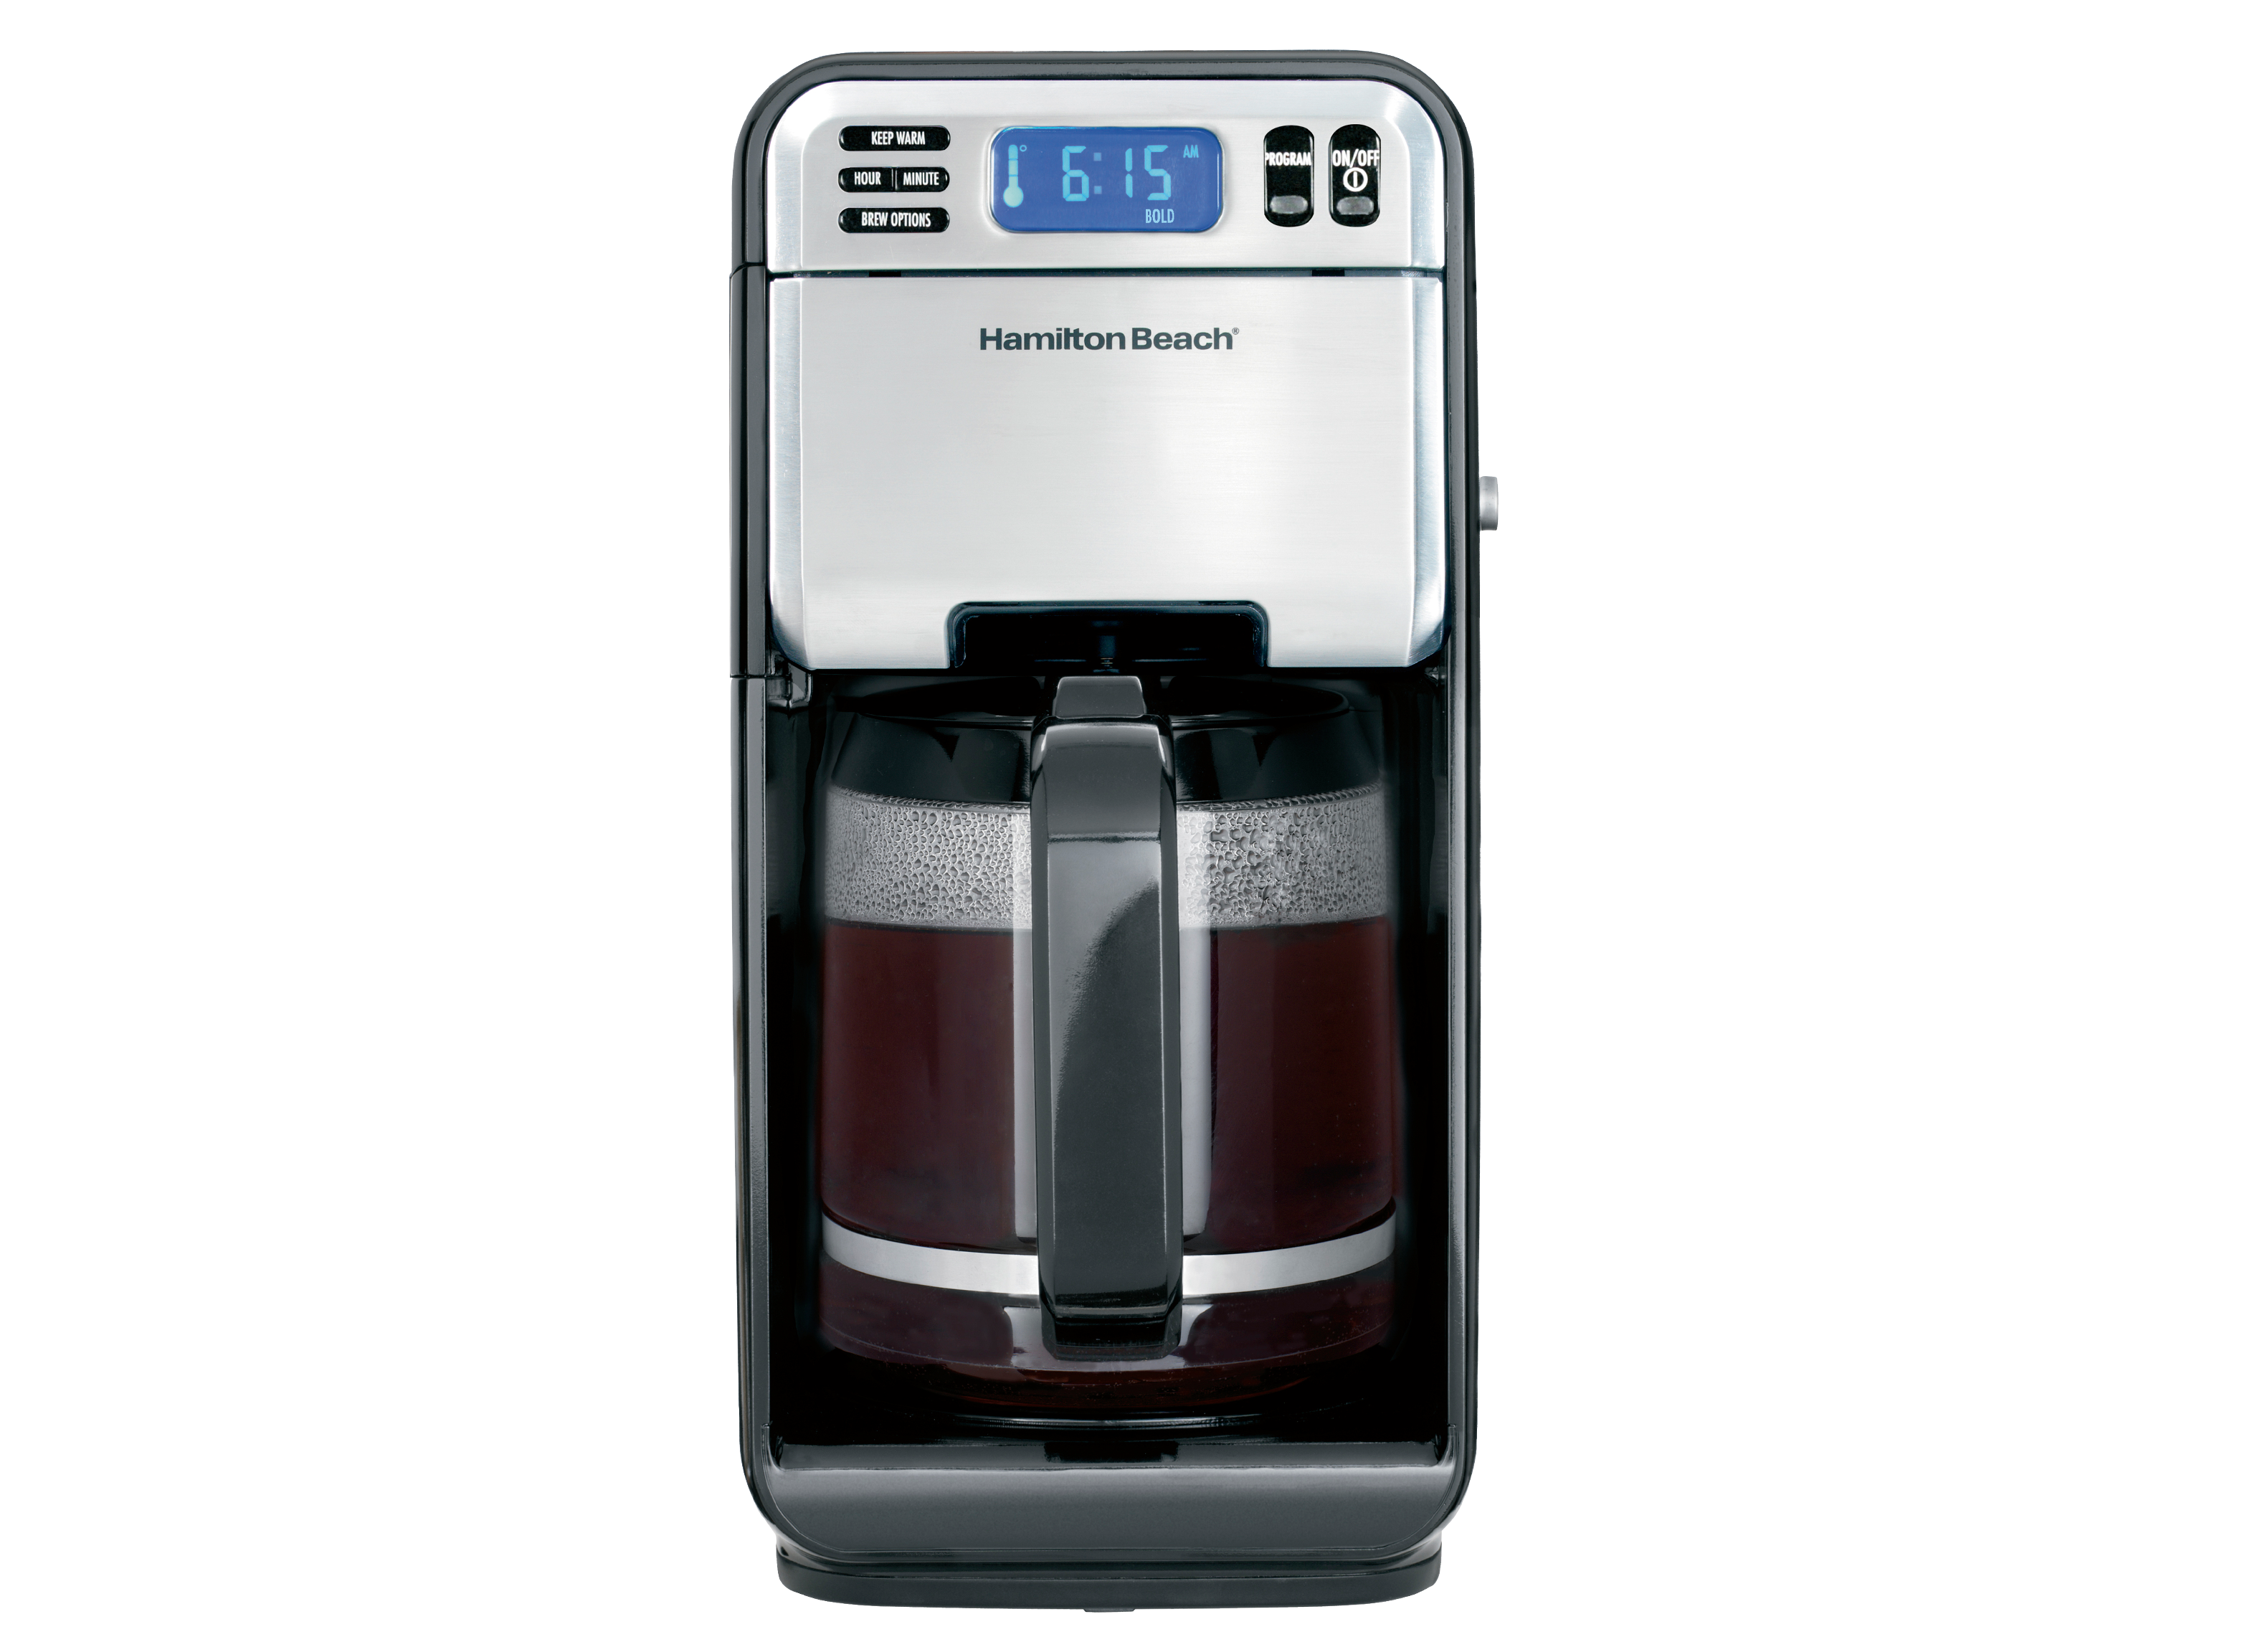 Hamilton Beach Stay or Go 45237R Coffee Maker Review - Consumer Reports